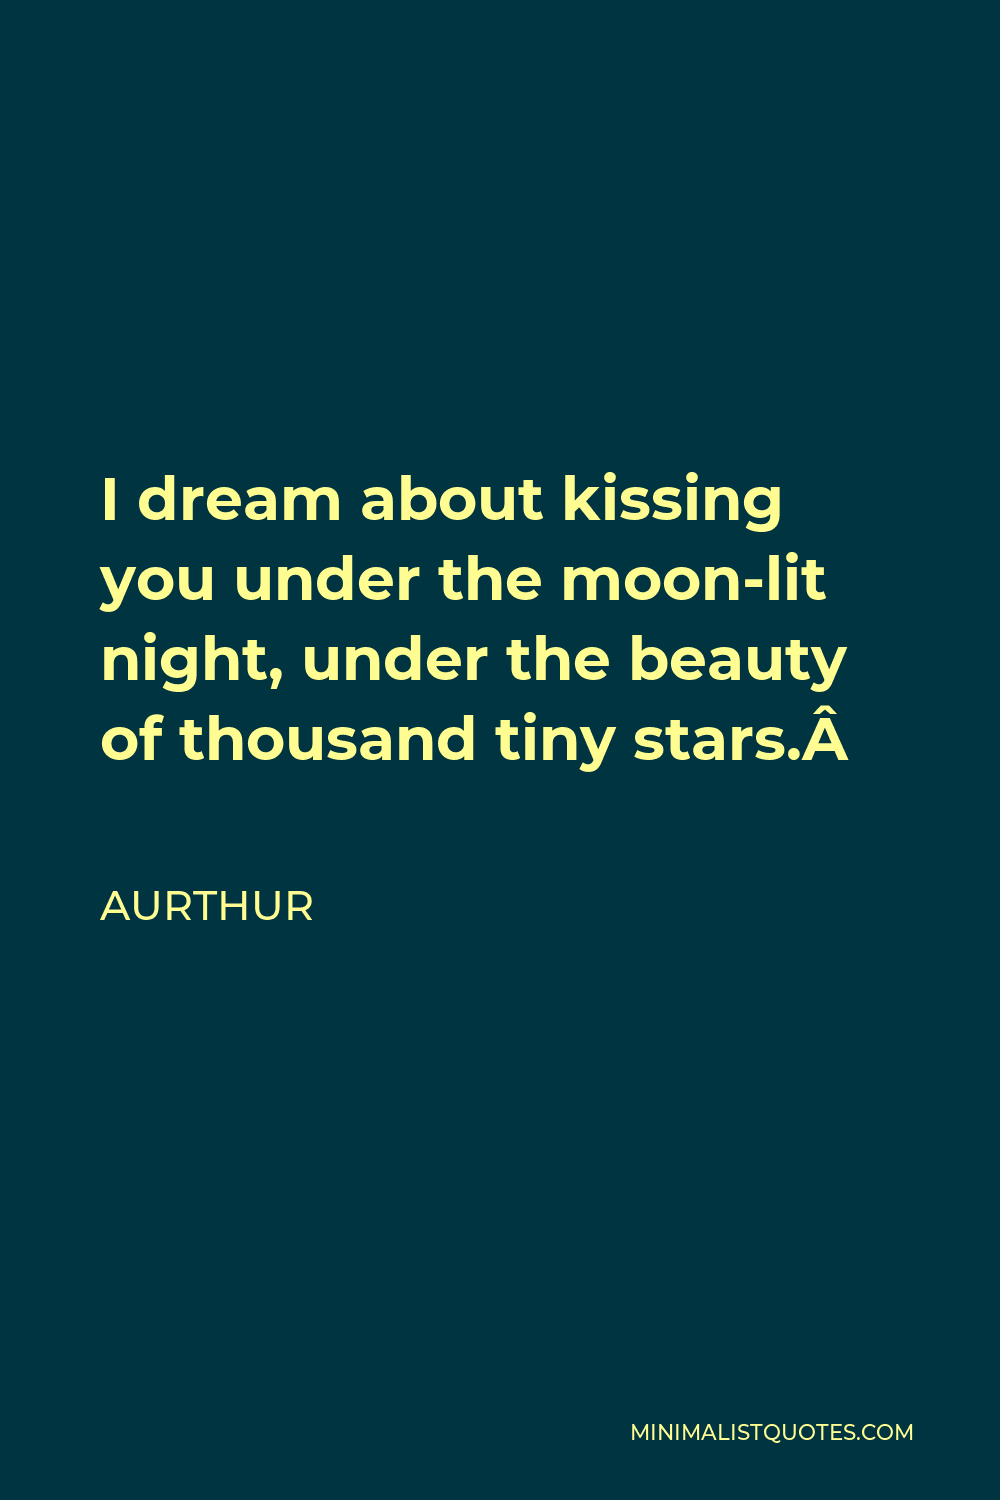 Aurthur Quote - I dream about kissing you under the moon-lit night, under the beauty of thousand tiny stars. 